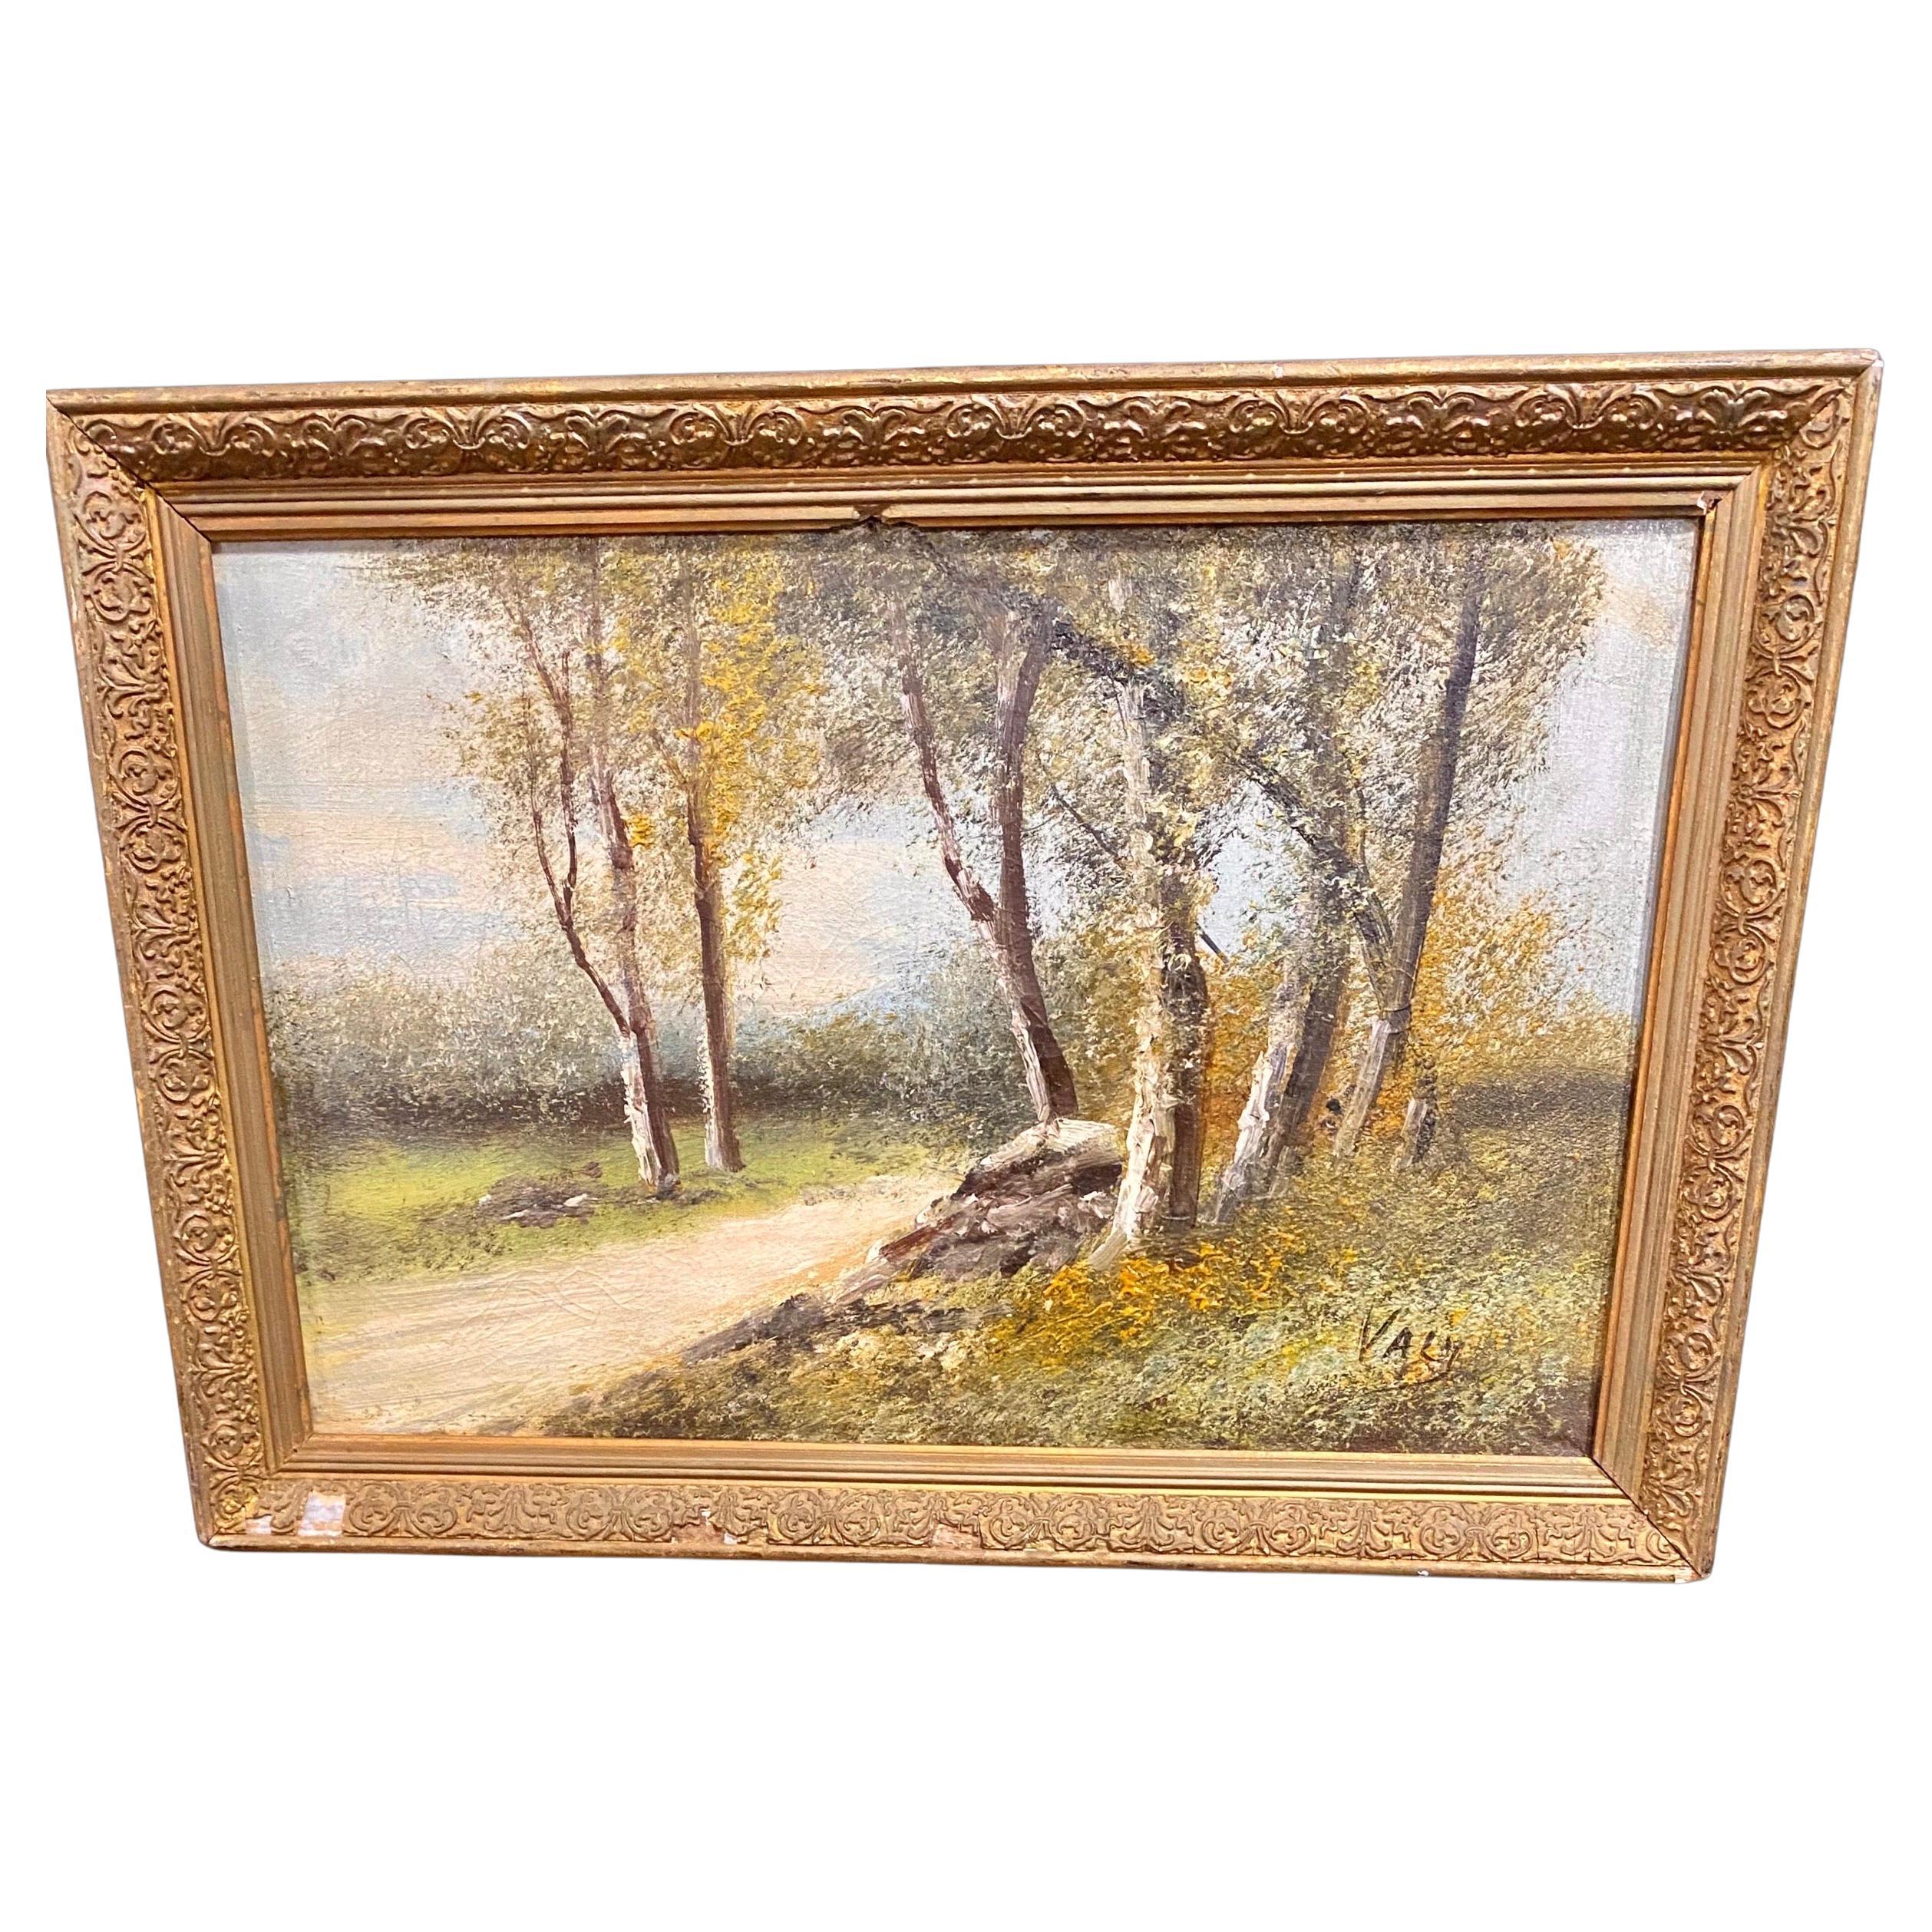 Antique French Oil Painting On Canvas In A Period Gesso Frame For Sale